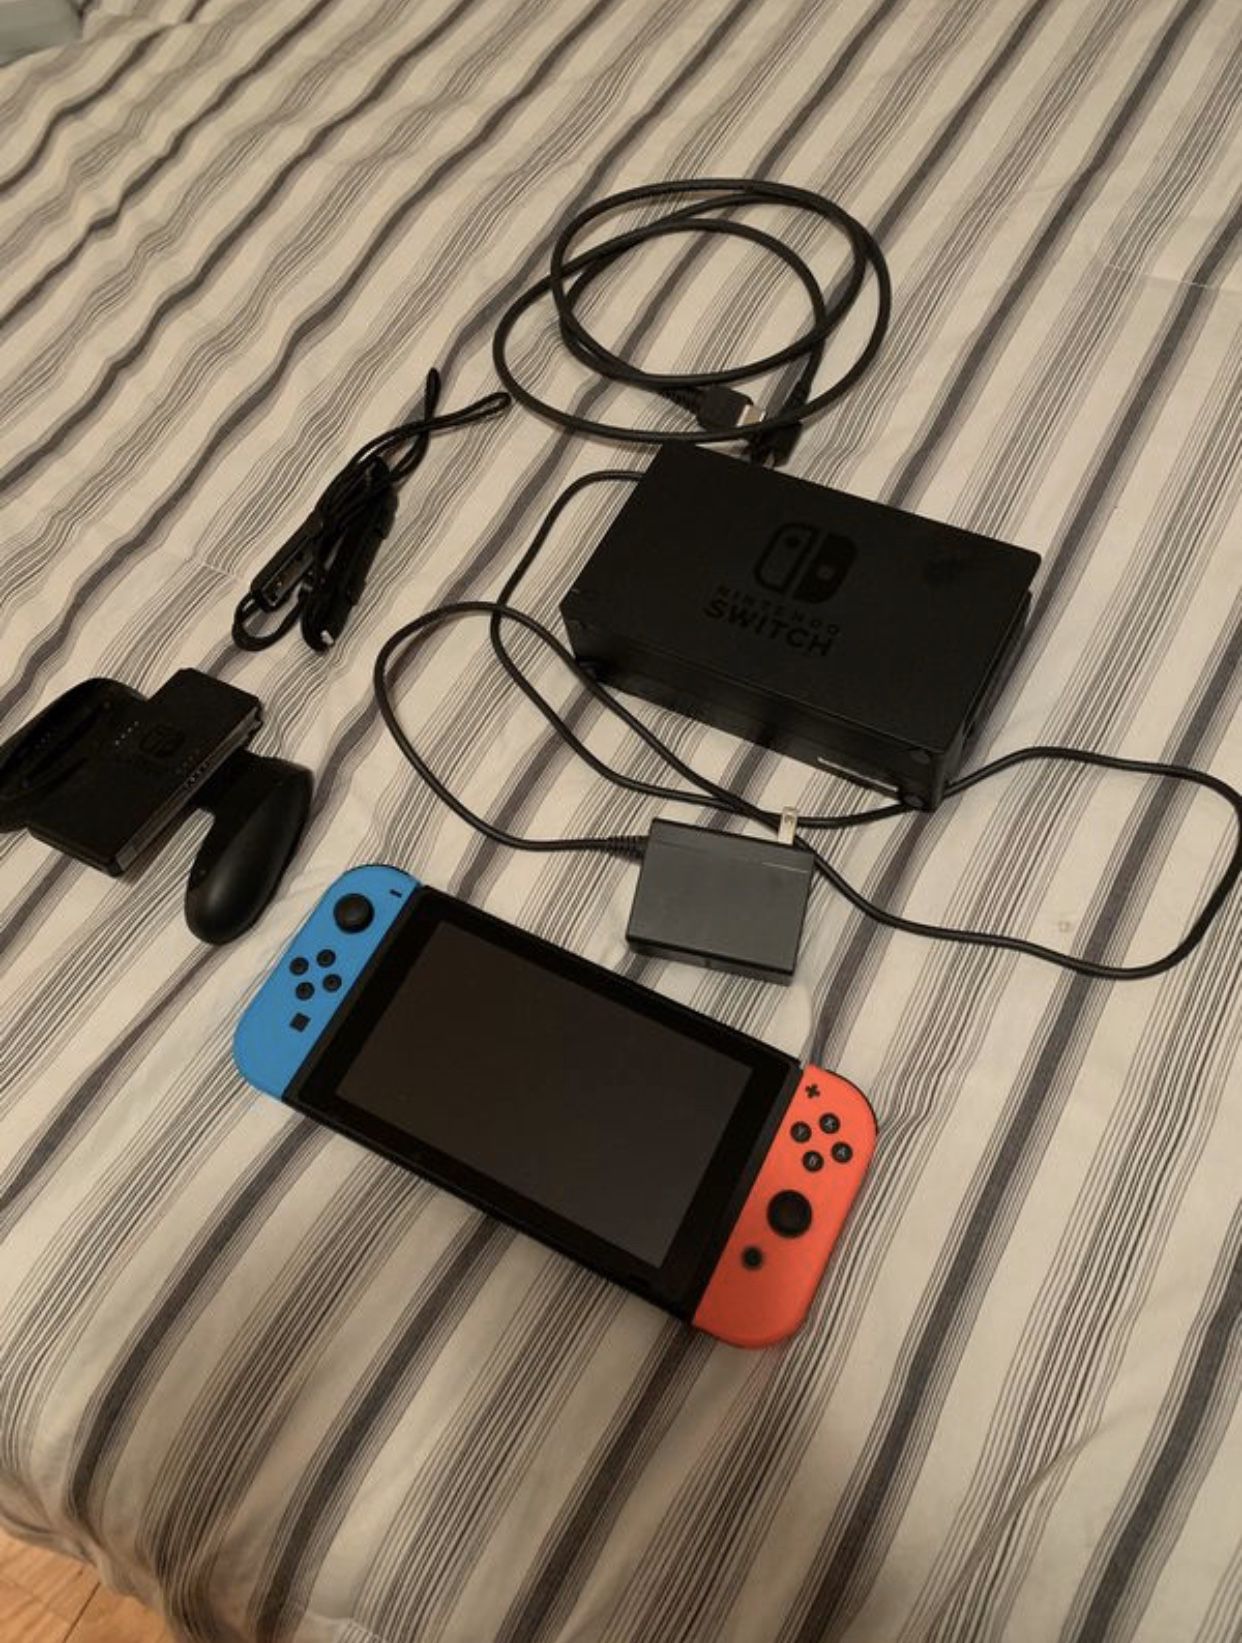 Nintendo Switch with accessories